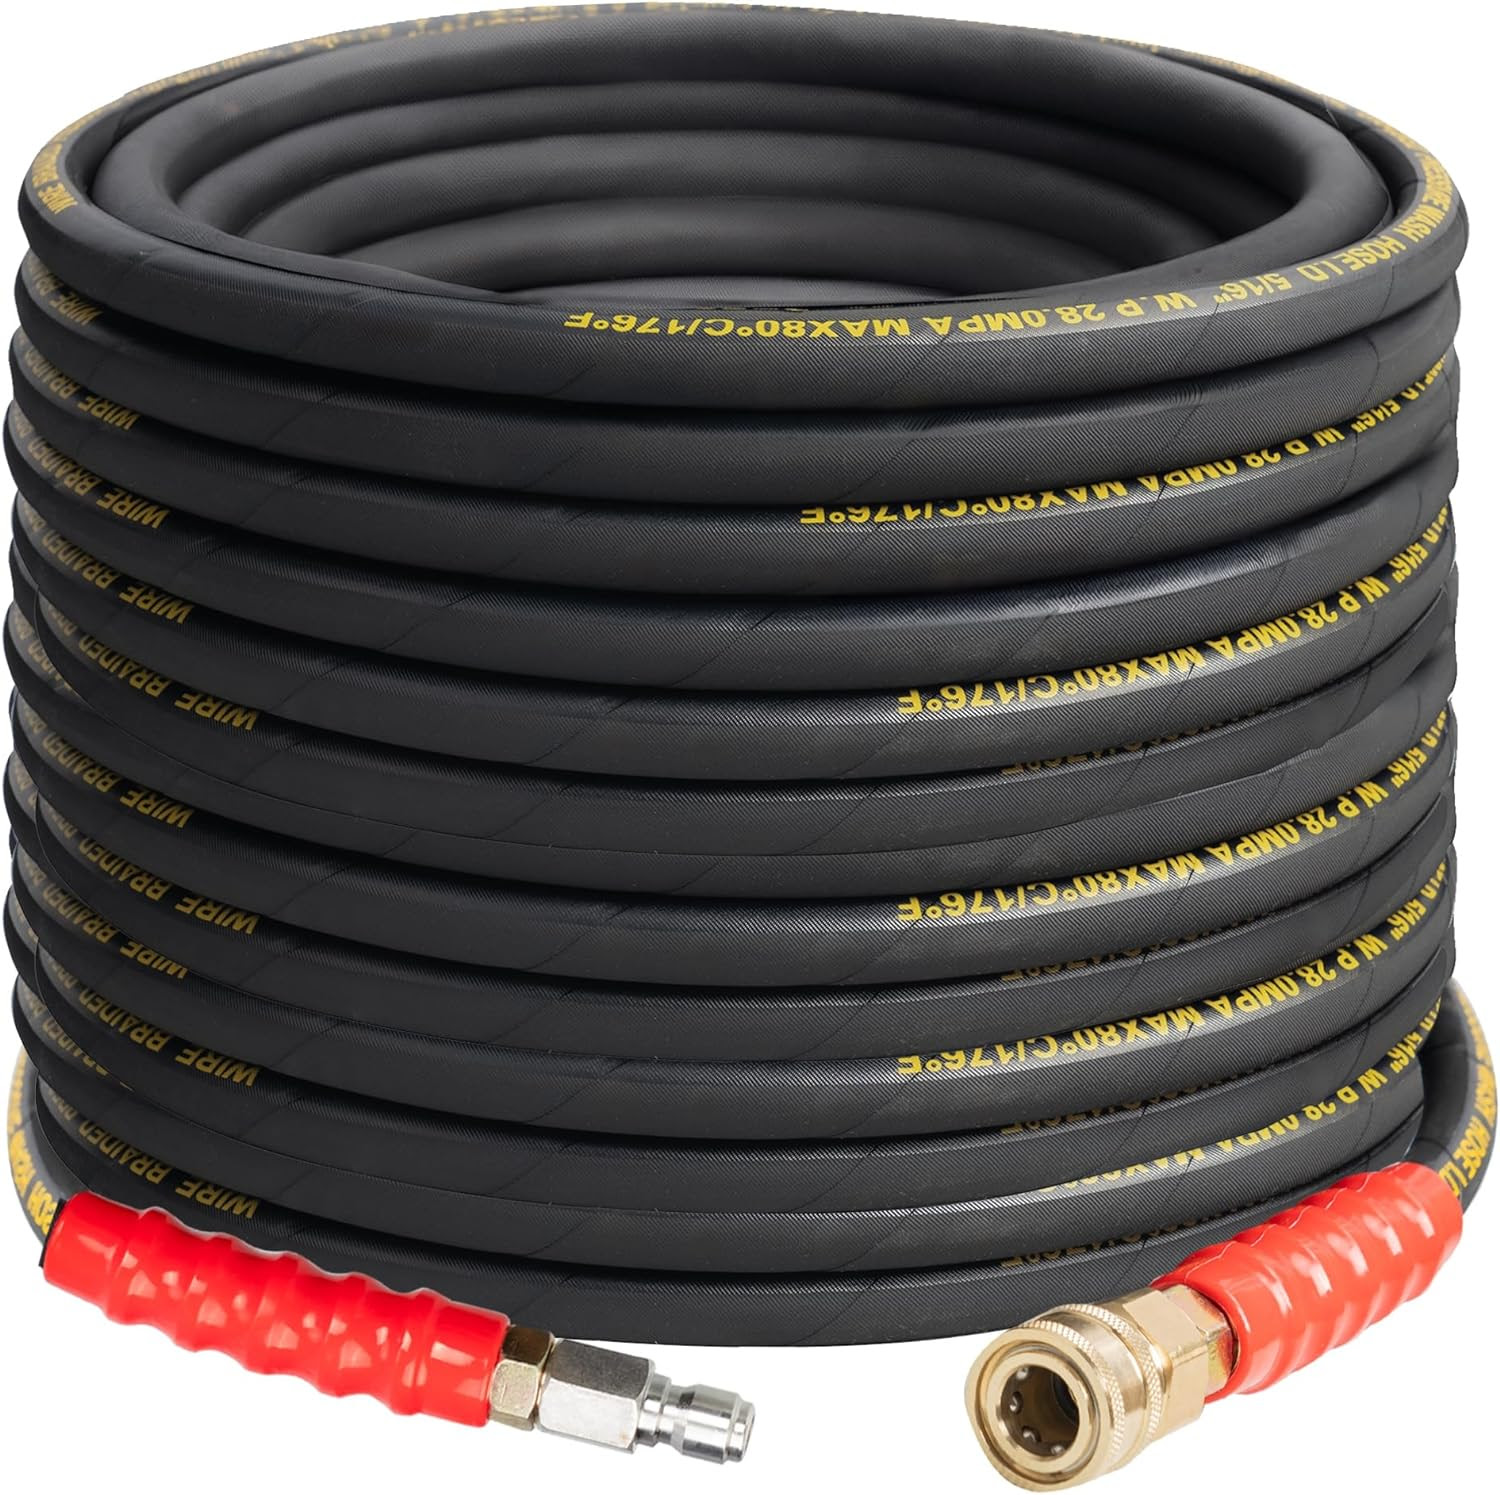 Hourleey 100 FT Pressure Washer Hose. 600units. EXW Los Angeles $28.00unit.